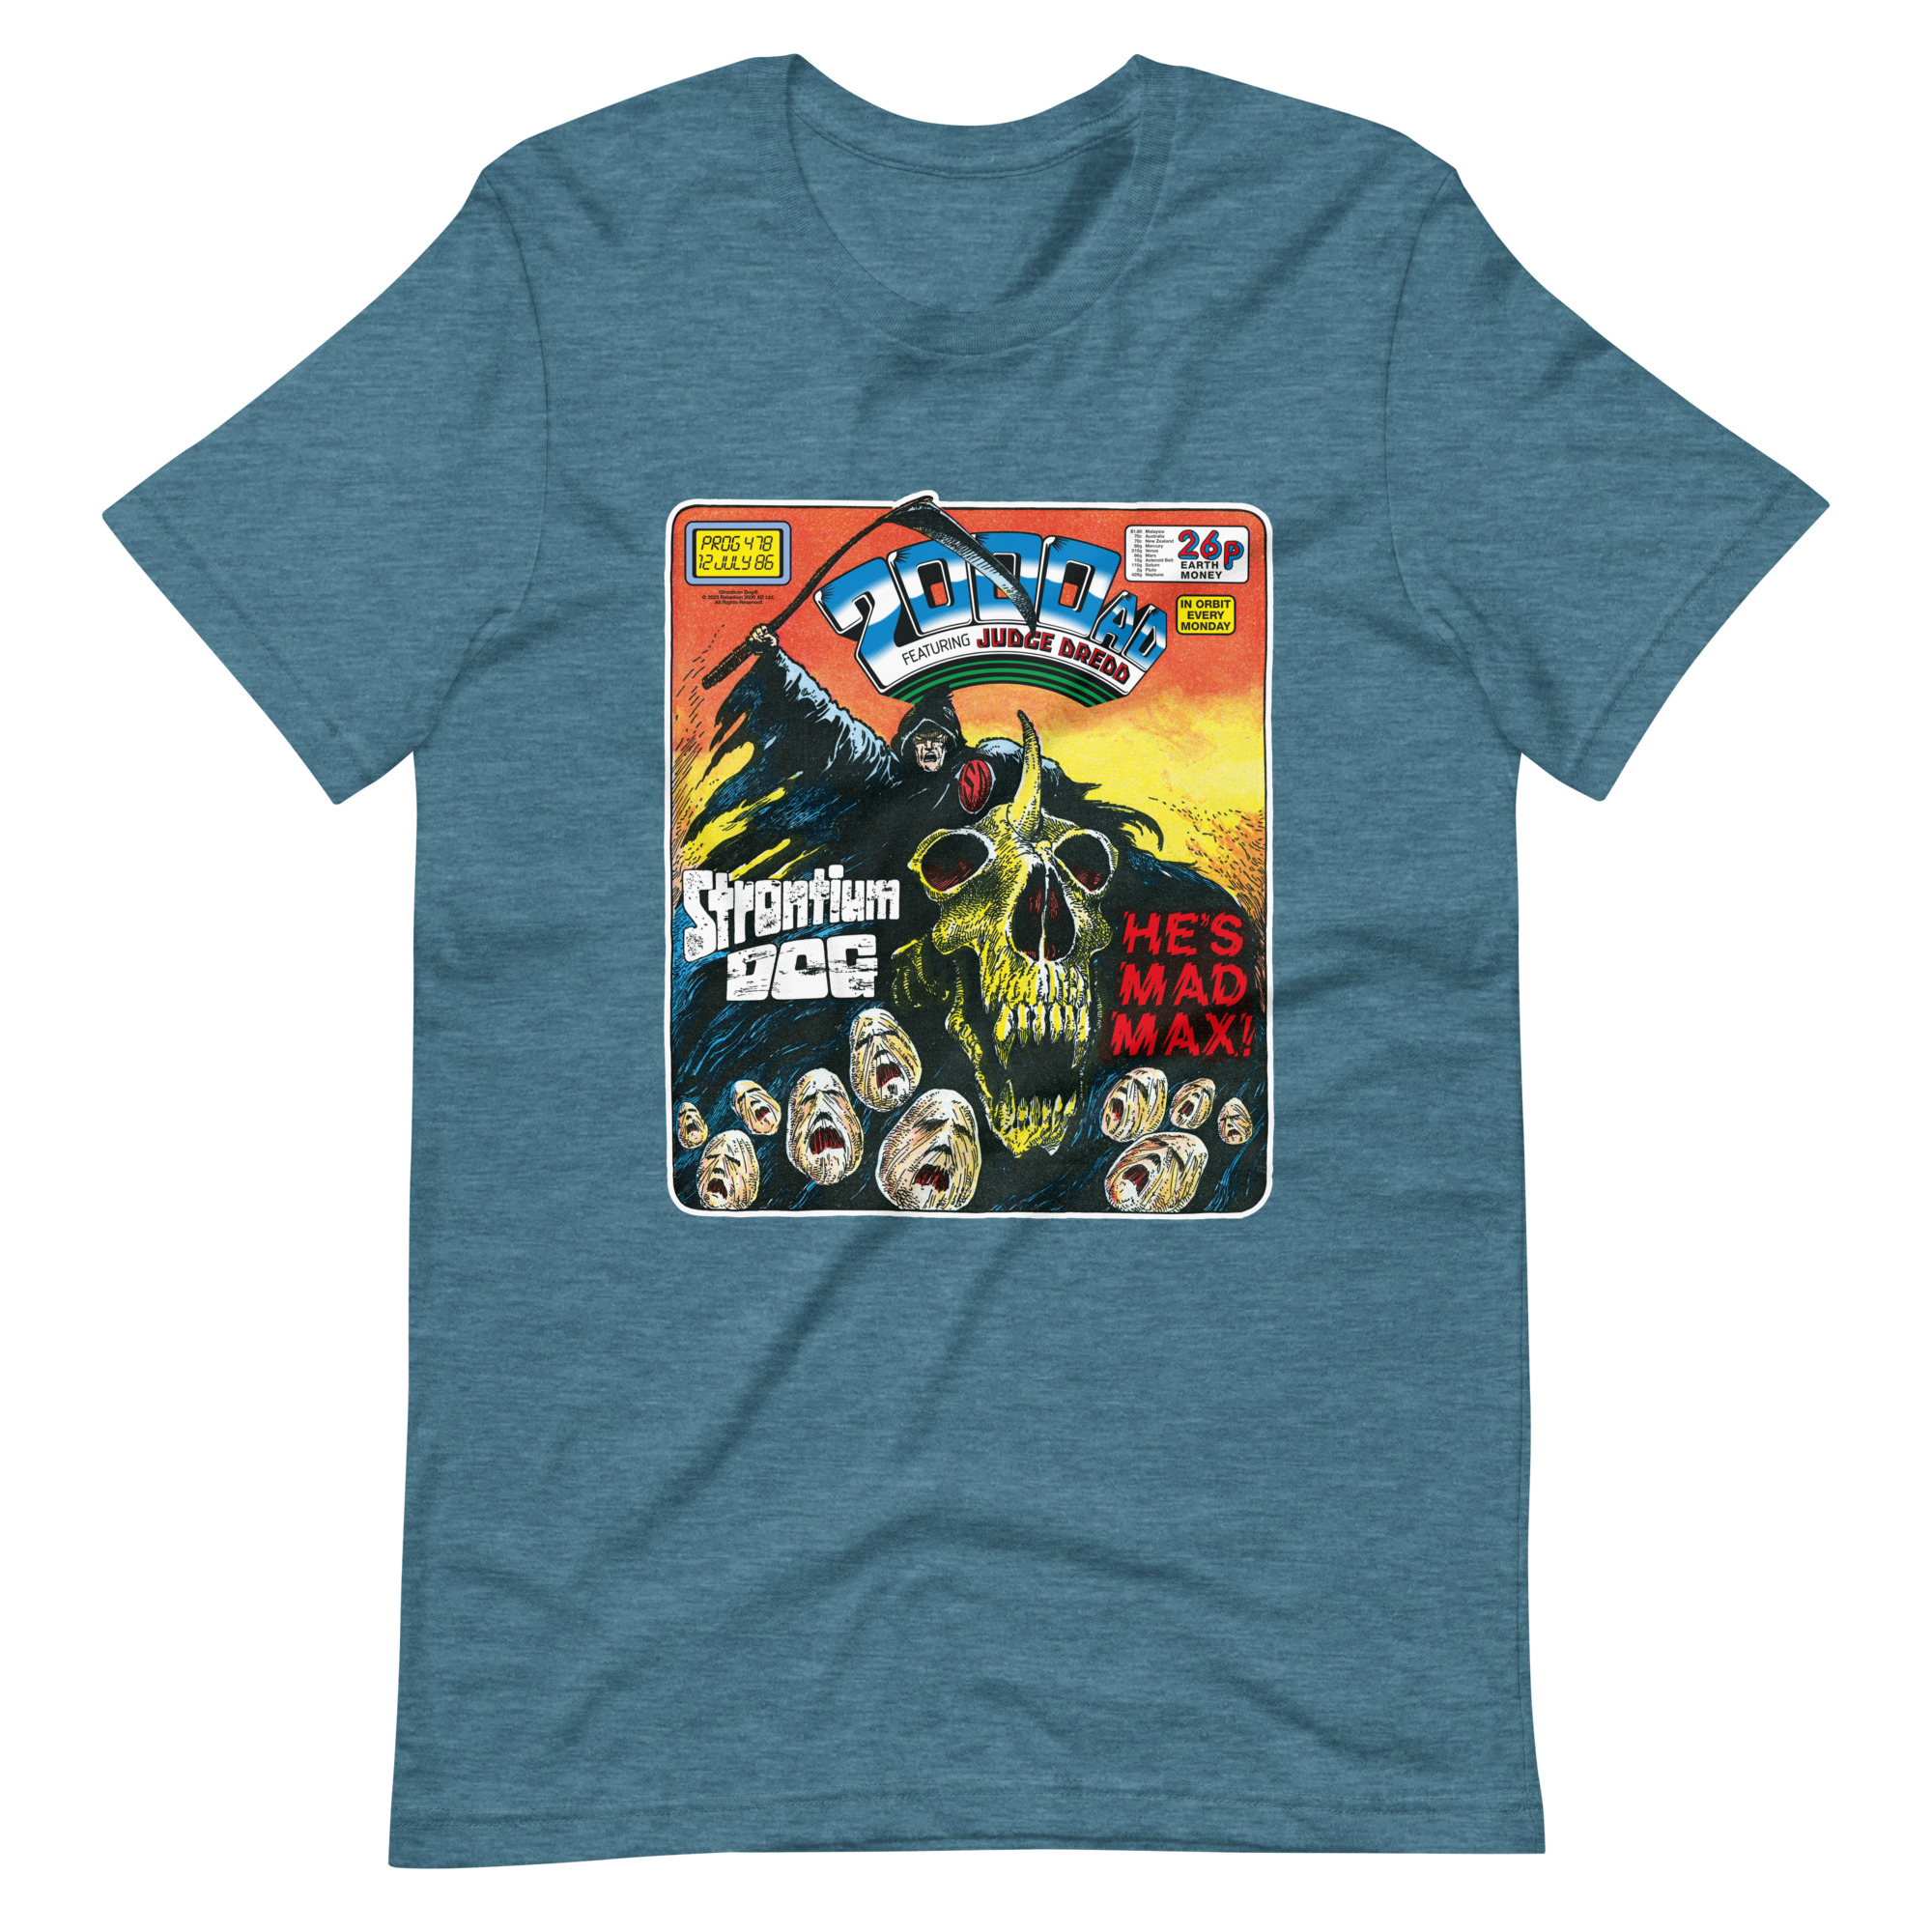 Teal Tshirt with an image on the chest. Image is cover of 2000 AD Prog 478 and depicts a man in a black hood, ragged cape and atop at horned skeleton beast while holding aloft a scythe above a sea of tormented faces! Metal.